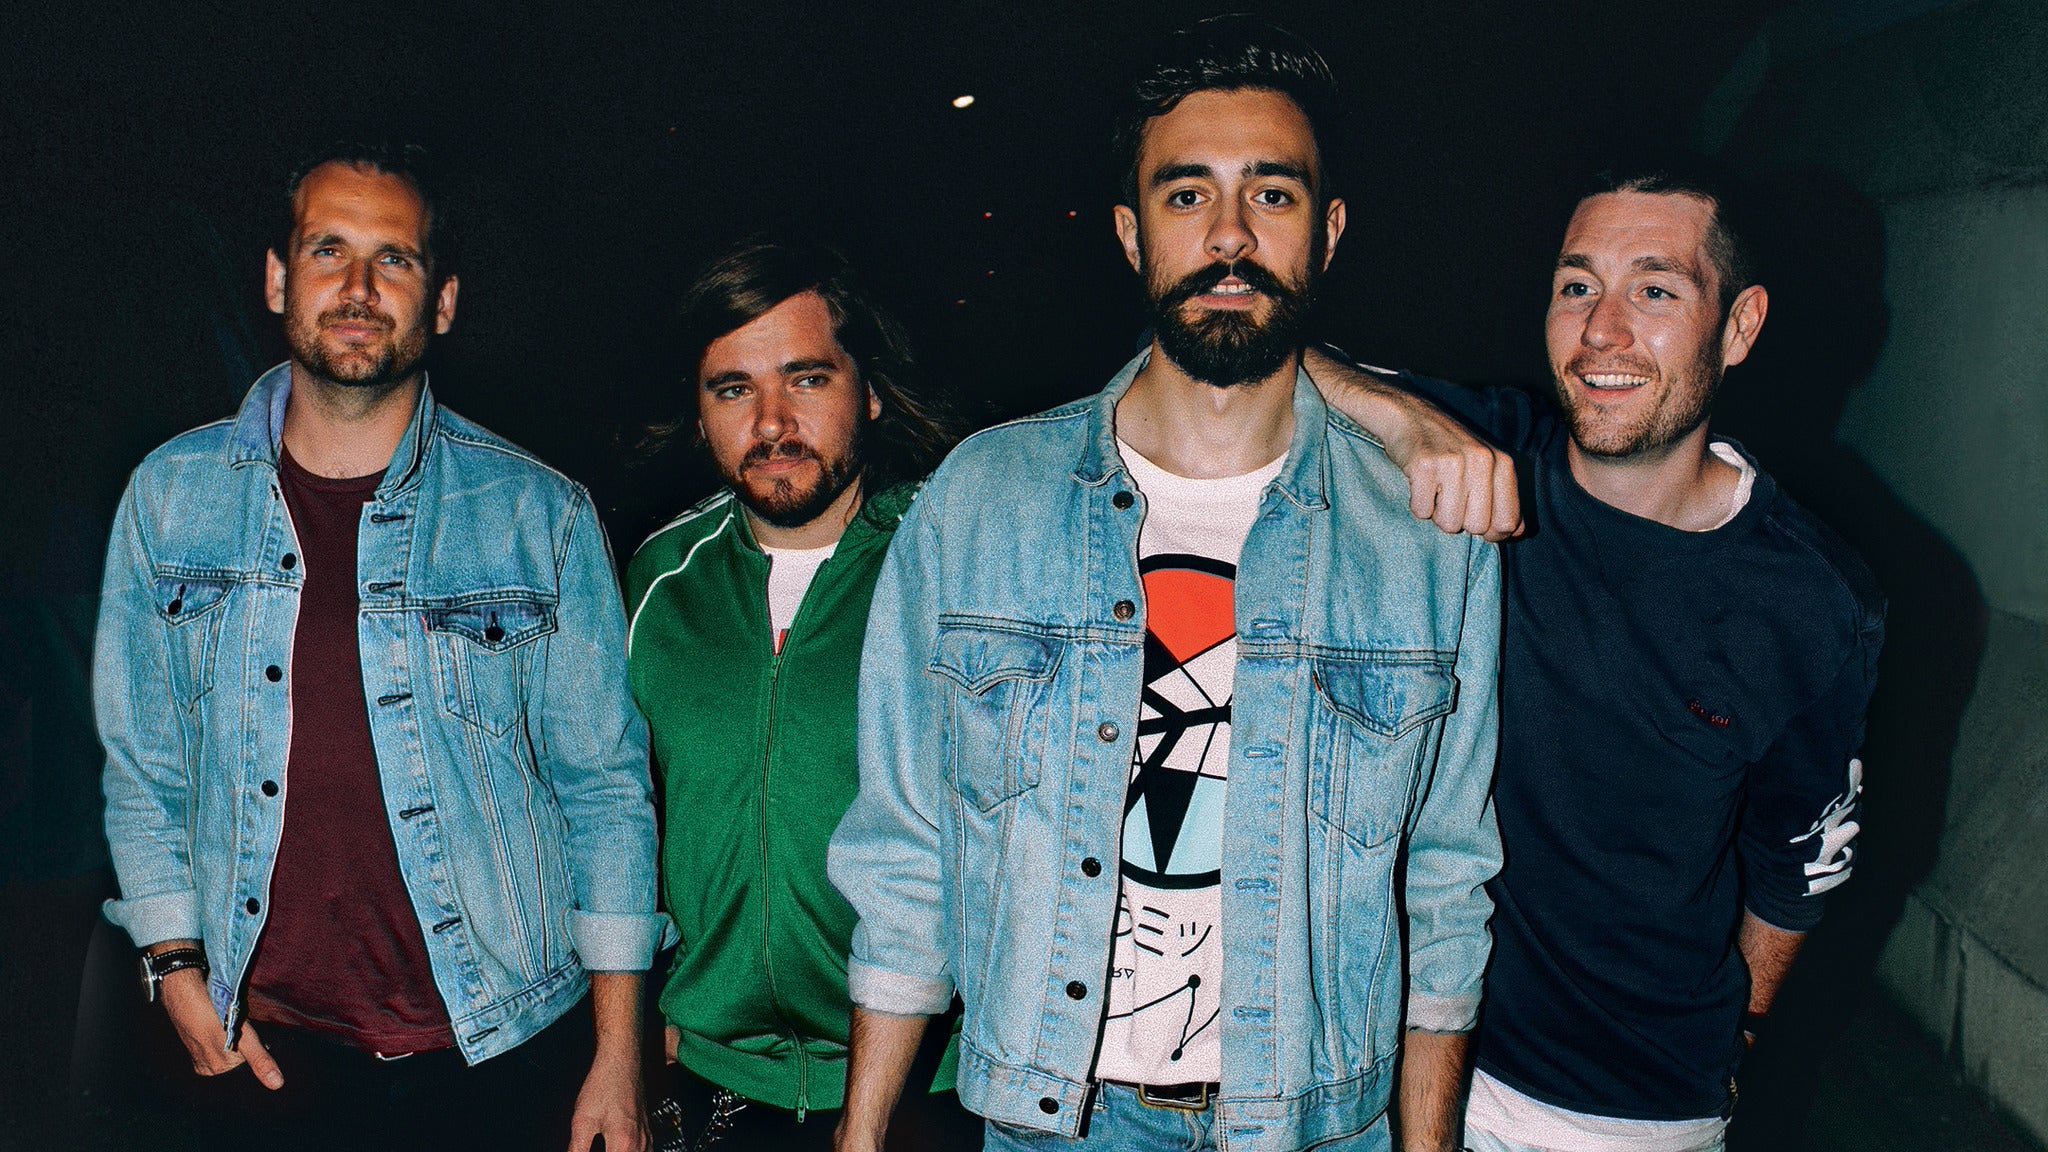 105.7 The Point HoHo Show: Bastille in St Louis promo photo for HoHo Show presale offer code